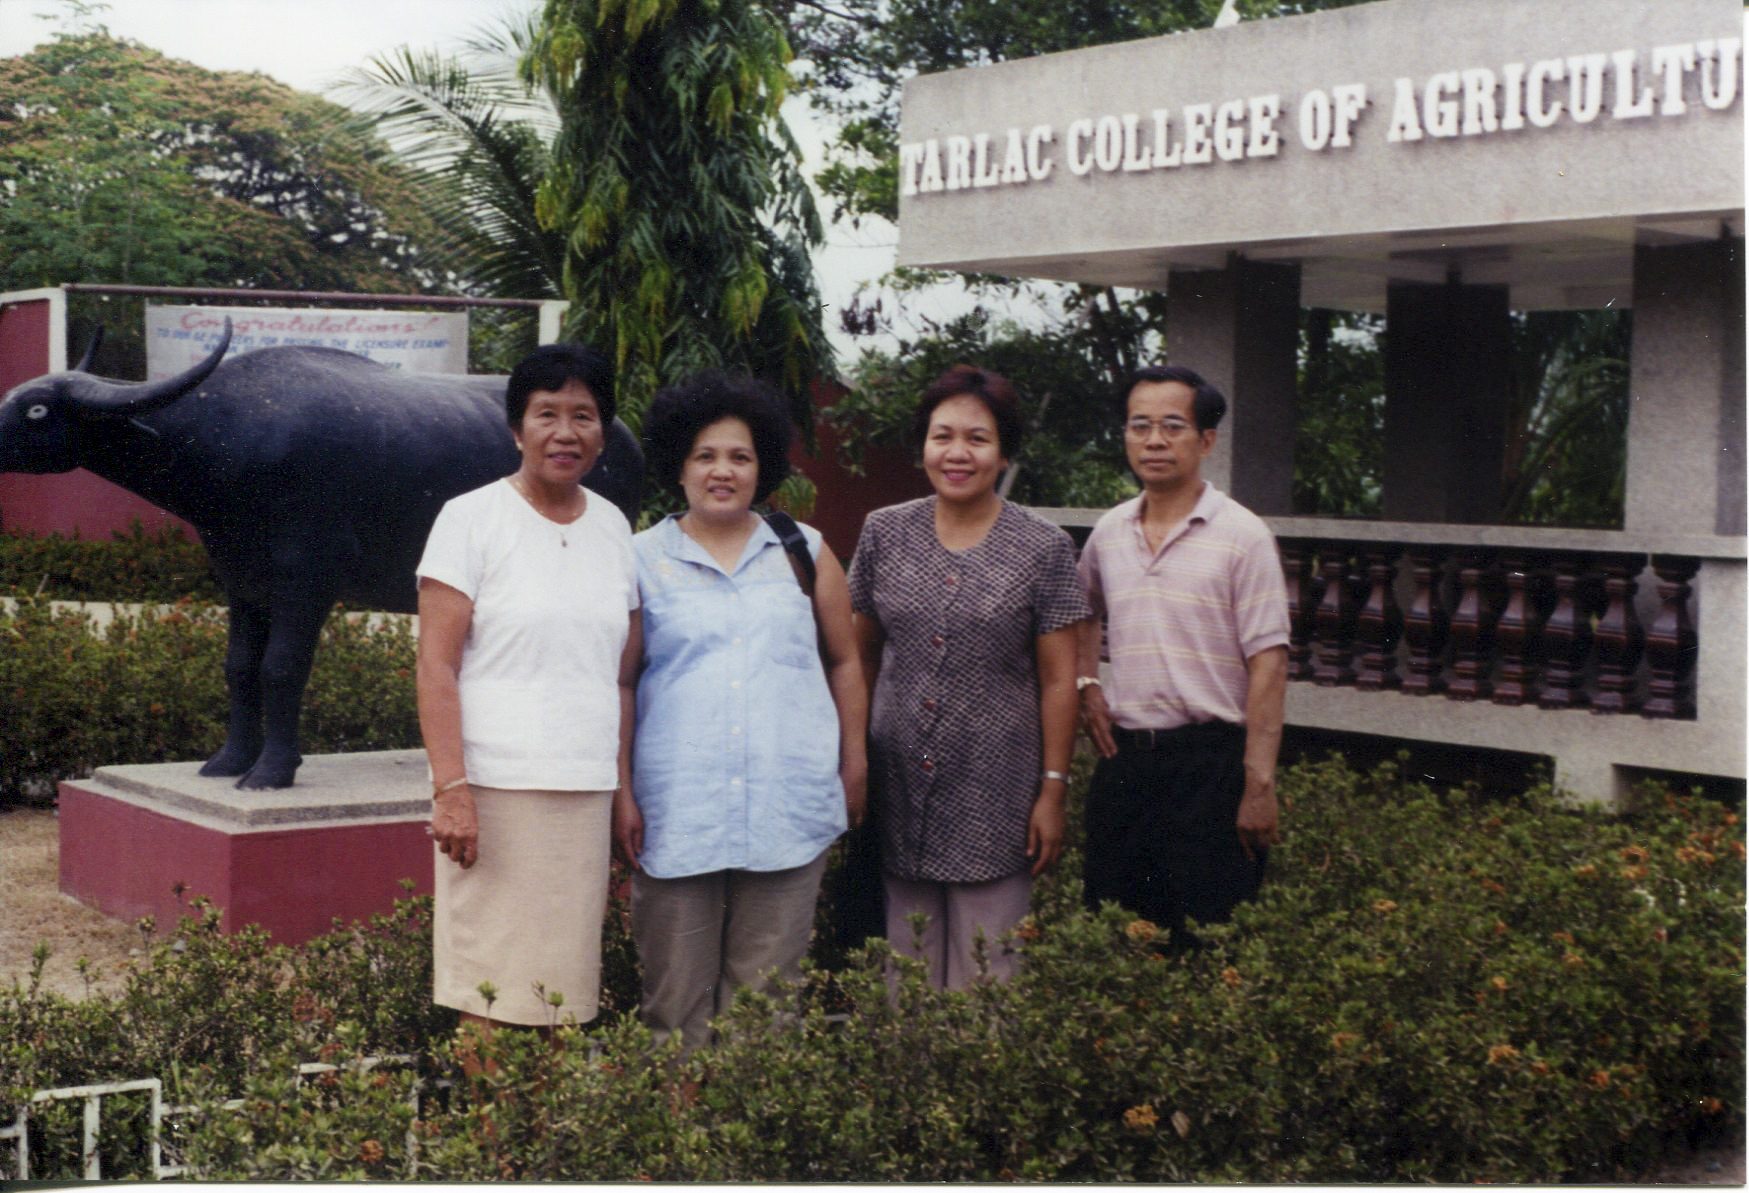 Photo of Carnate, wife, and friends, 1960'sTaken in the 1960's at Tarlac College of Agriculture (1st high school, attended one year; opened up schooling for him)- acquired while visiting Philippines. Left to right: friend/teacher, wife Olivia, friend, Orlando. Any views, findings, conclusions, or recommendations expressed in this story do not necessarily represent those of the National Endowment for the Humanities. (c) Field Museum of Natural History - CC BY-NC 4.0